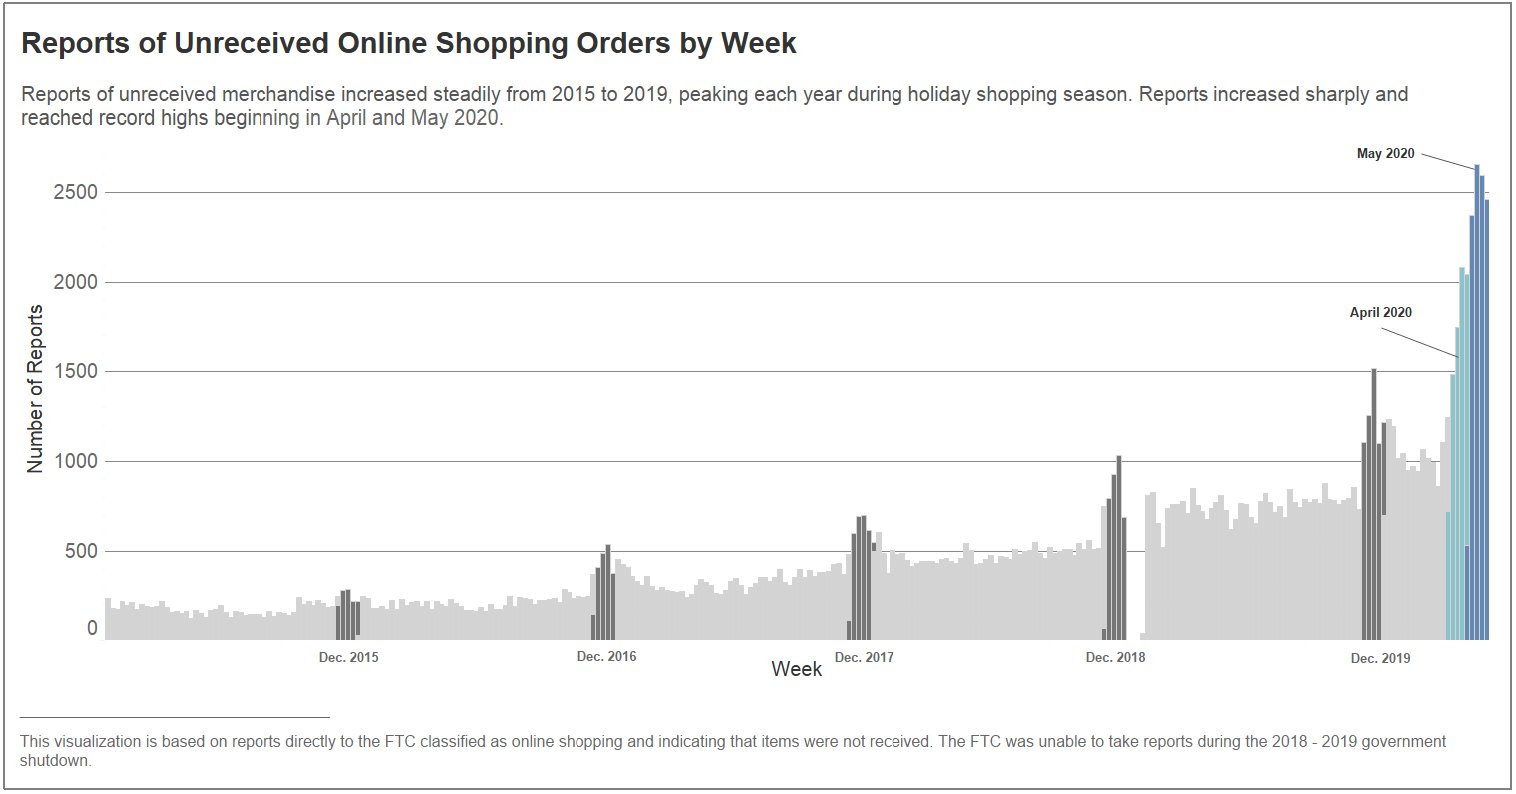 Reports of Unreceived Online Shopping Orders by Week - Reports of unreceived merchandise increased steadily from 2015 to 2019, peaking each year during holiday shopping season. Reports increased sharply and reached record highs beginning in April and May 2020.